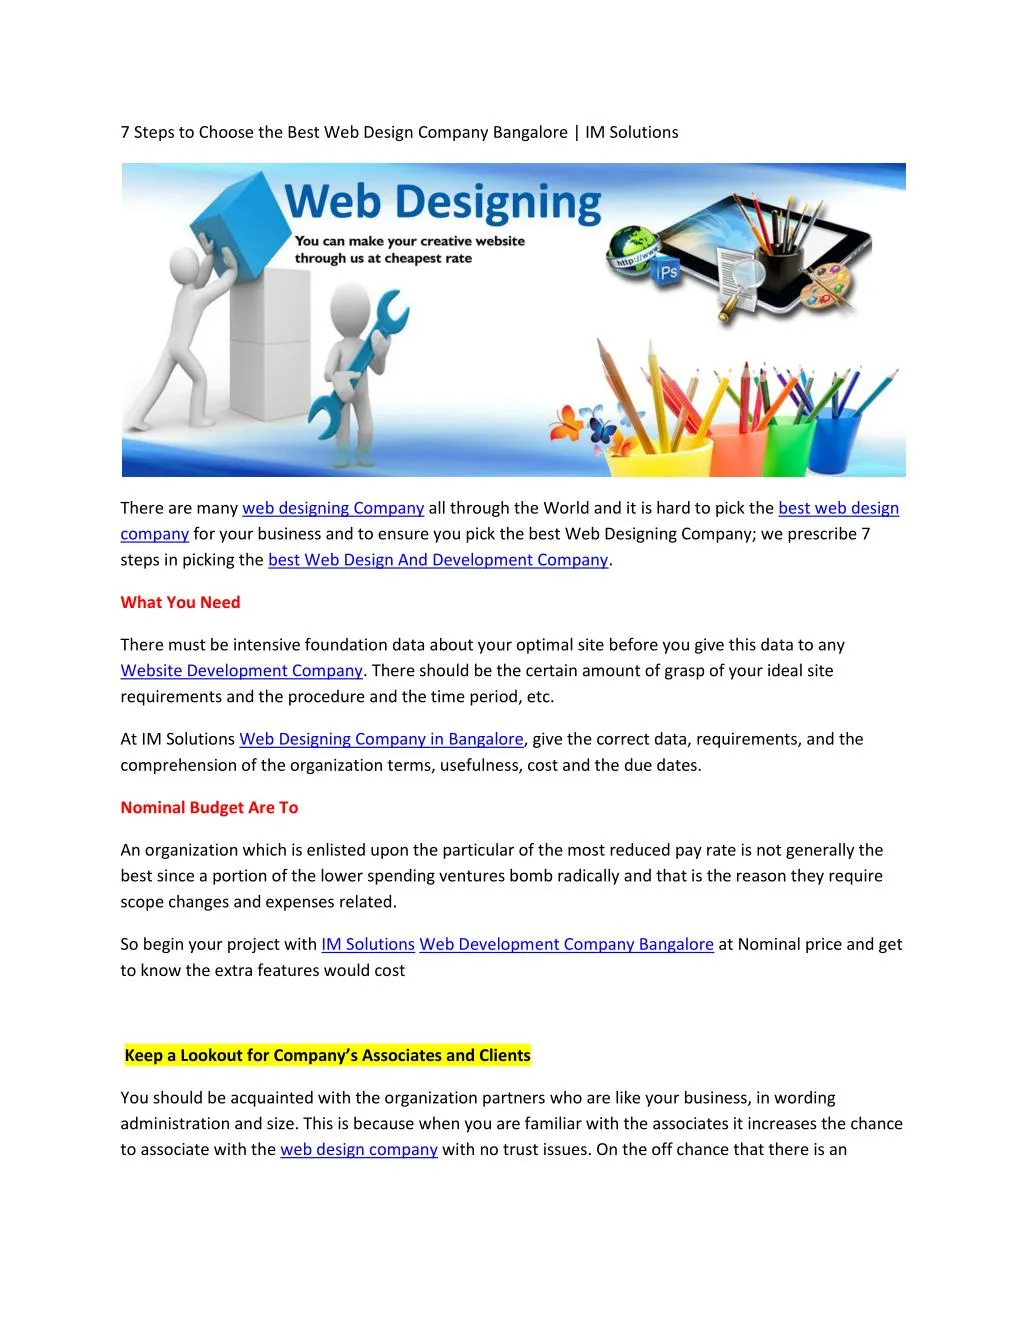 7 steps to choose the best web design company